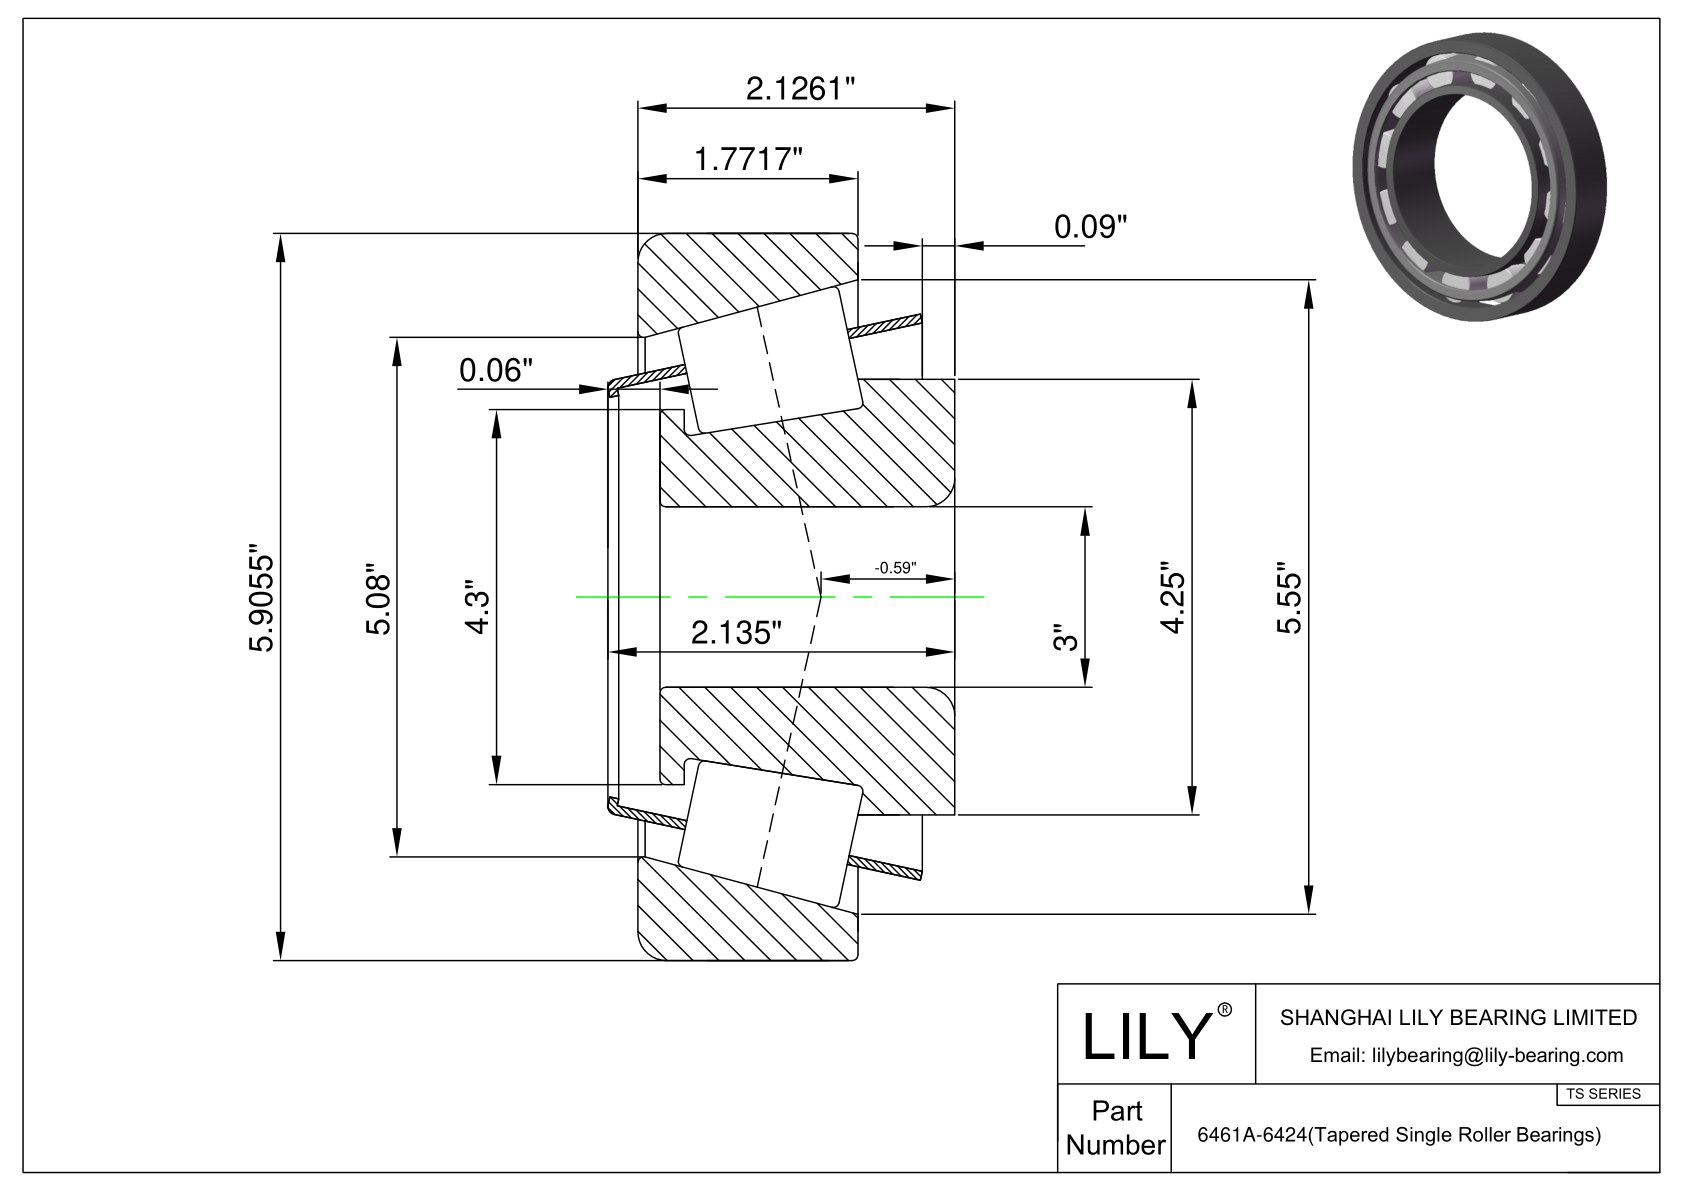 6461A-6424 TS (Tapered Single Roller Bearings) (Imperial) cad drawing